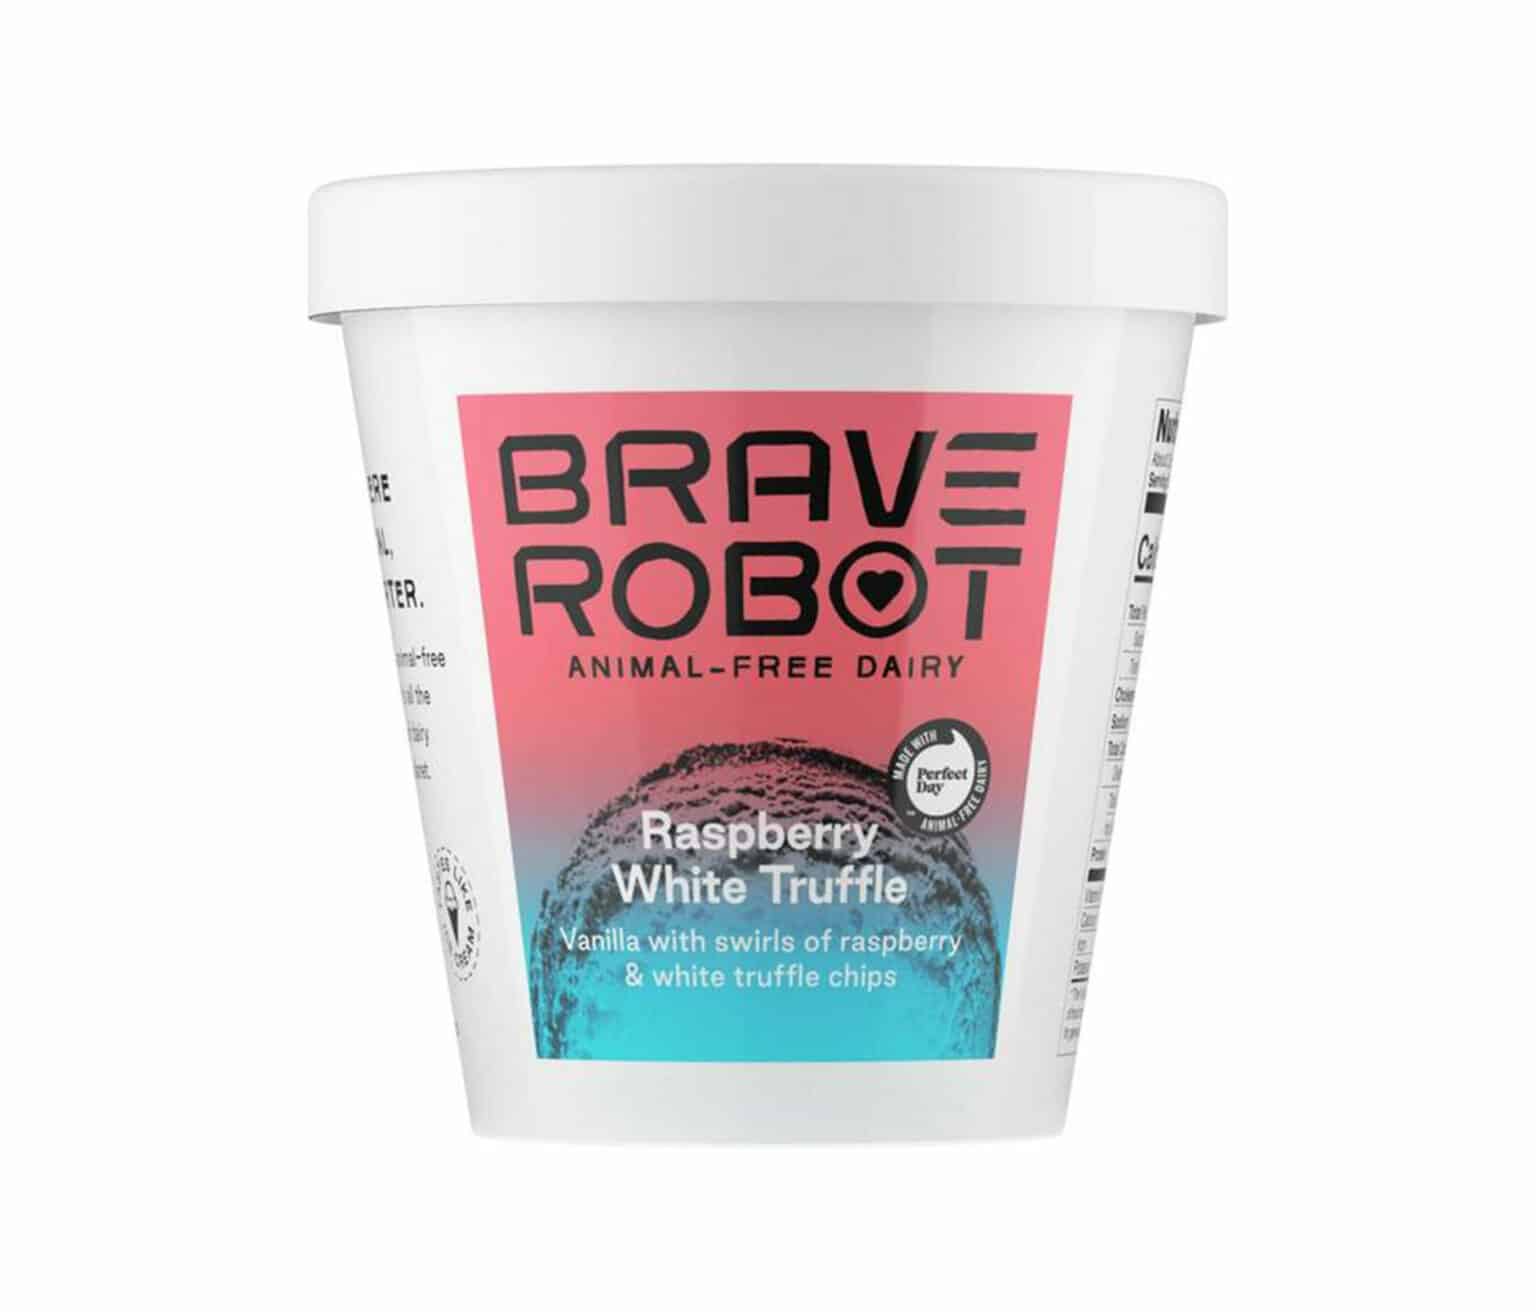 is brave robot dairy free